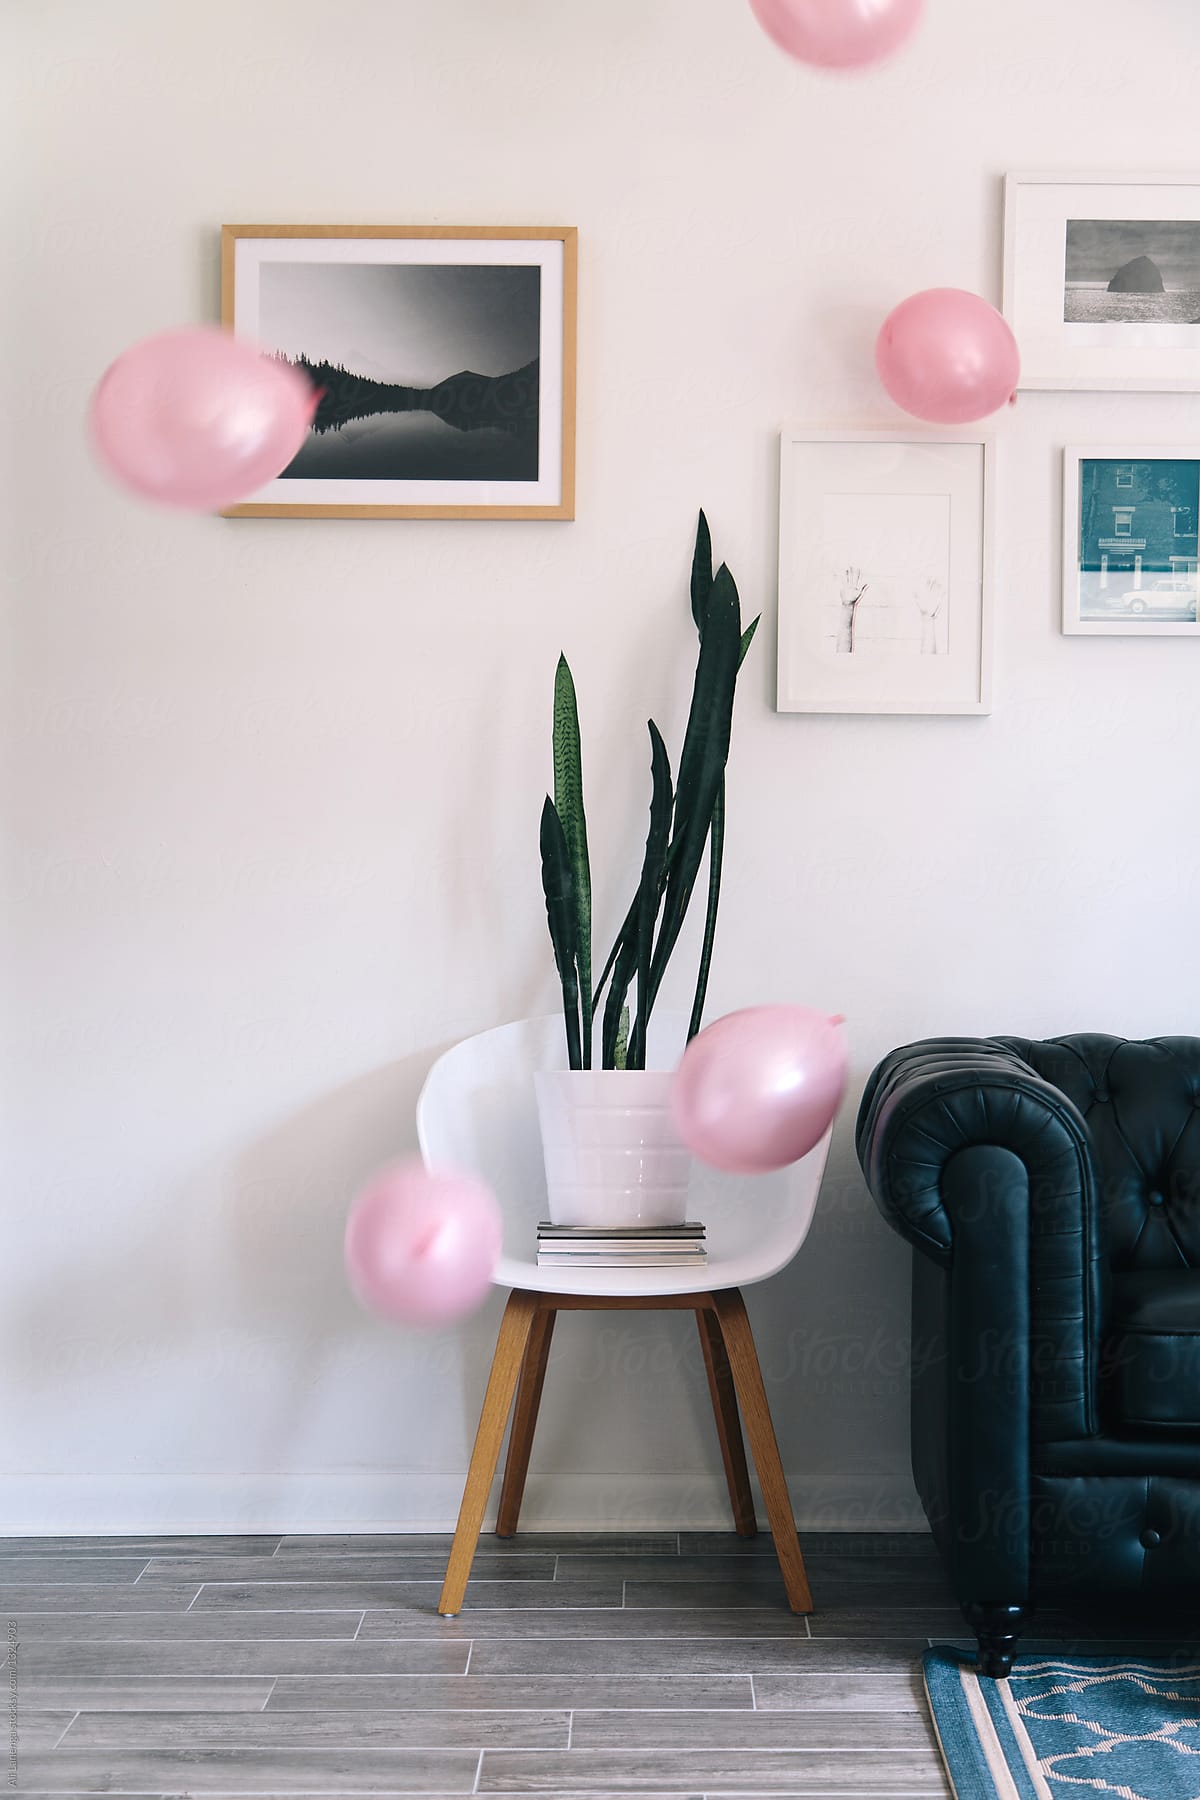 Home Interior with Balloons